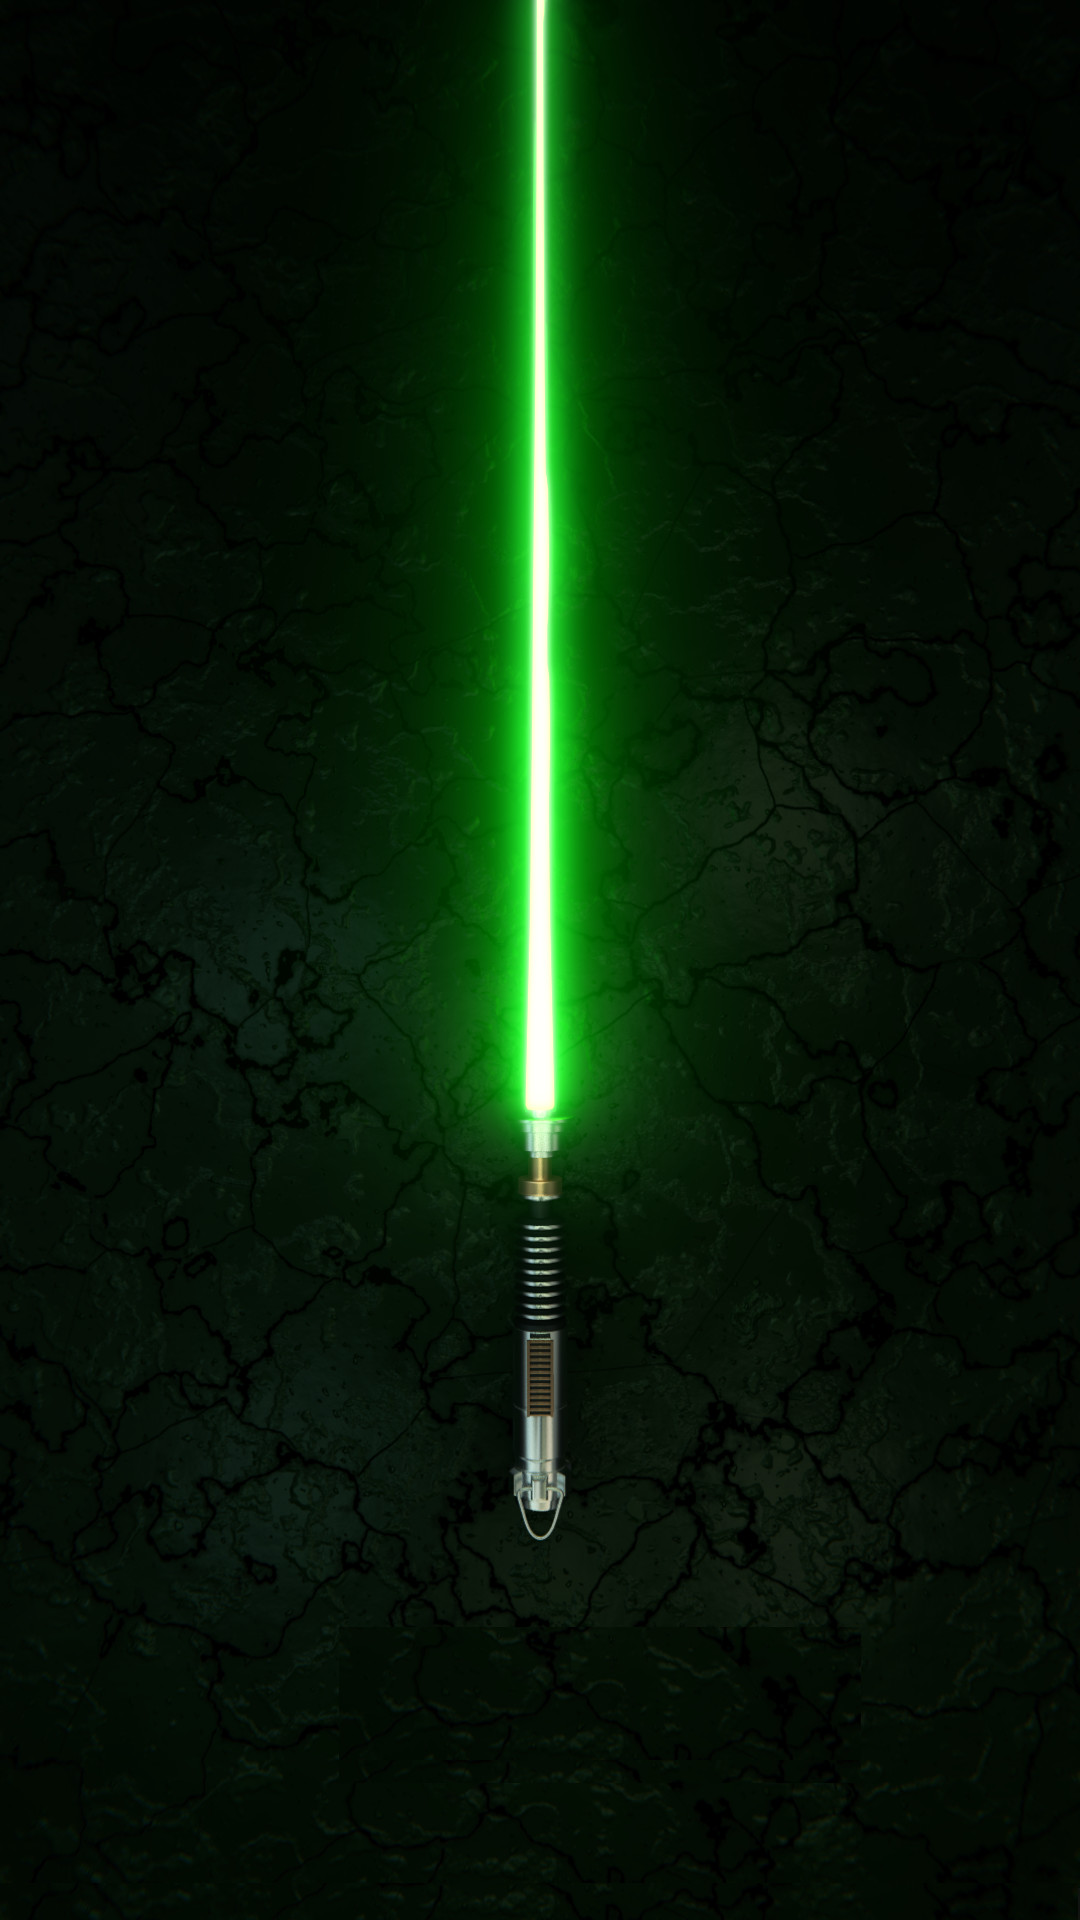 Star Wars Lightsaber – Tap to see more exciting Star Wars wallpaper!  @mobile9